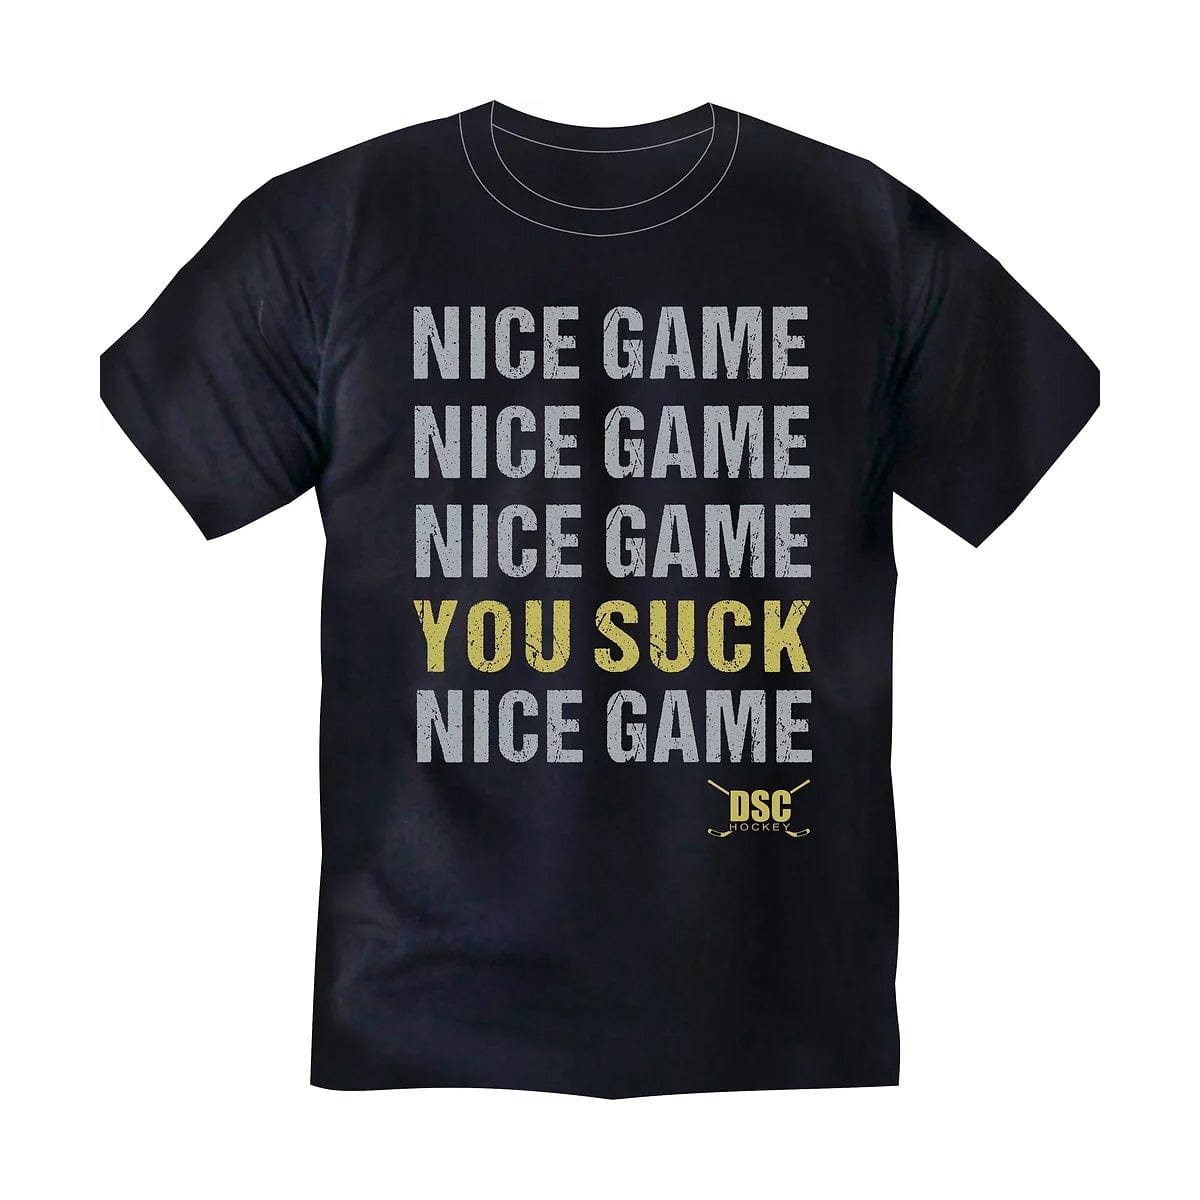 DSC Hockey Nice Game Youth Shirt - The Hockey Shop Source For Sports